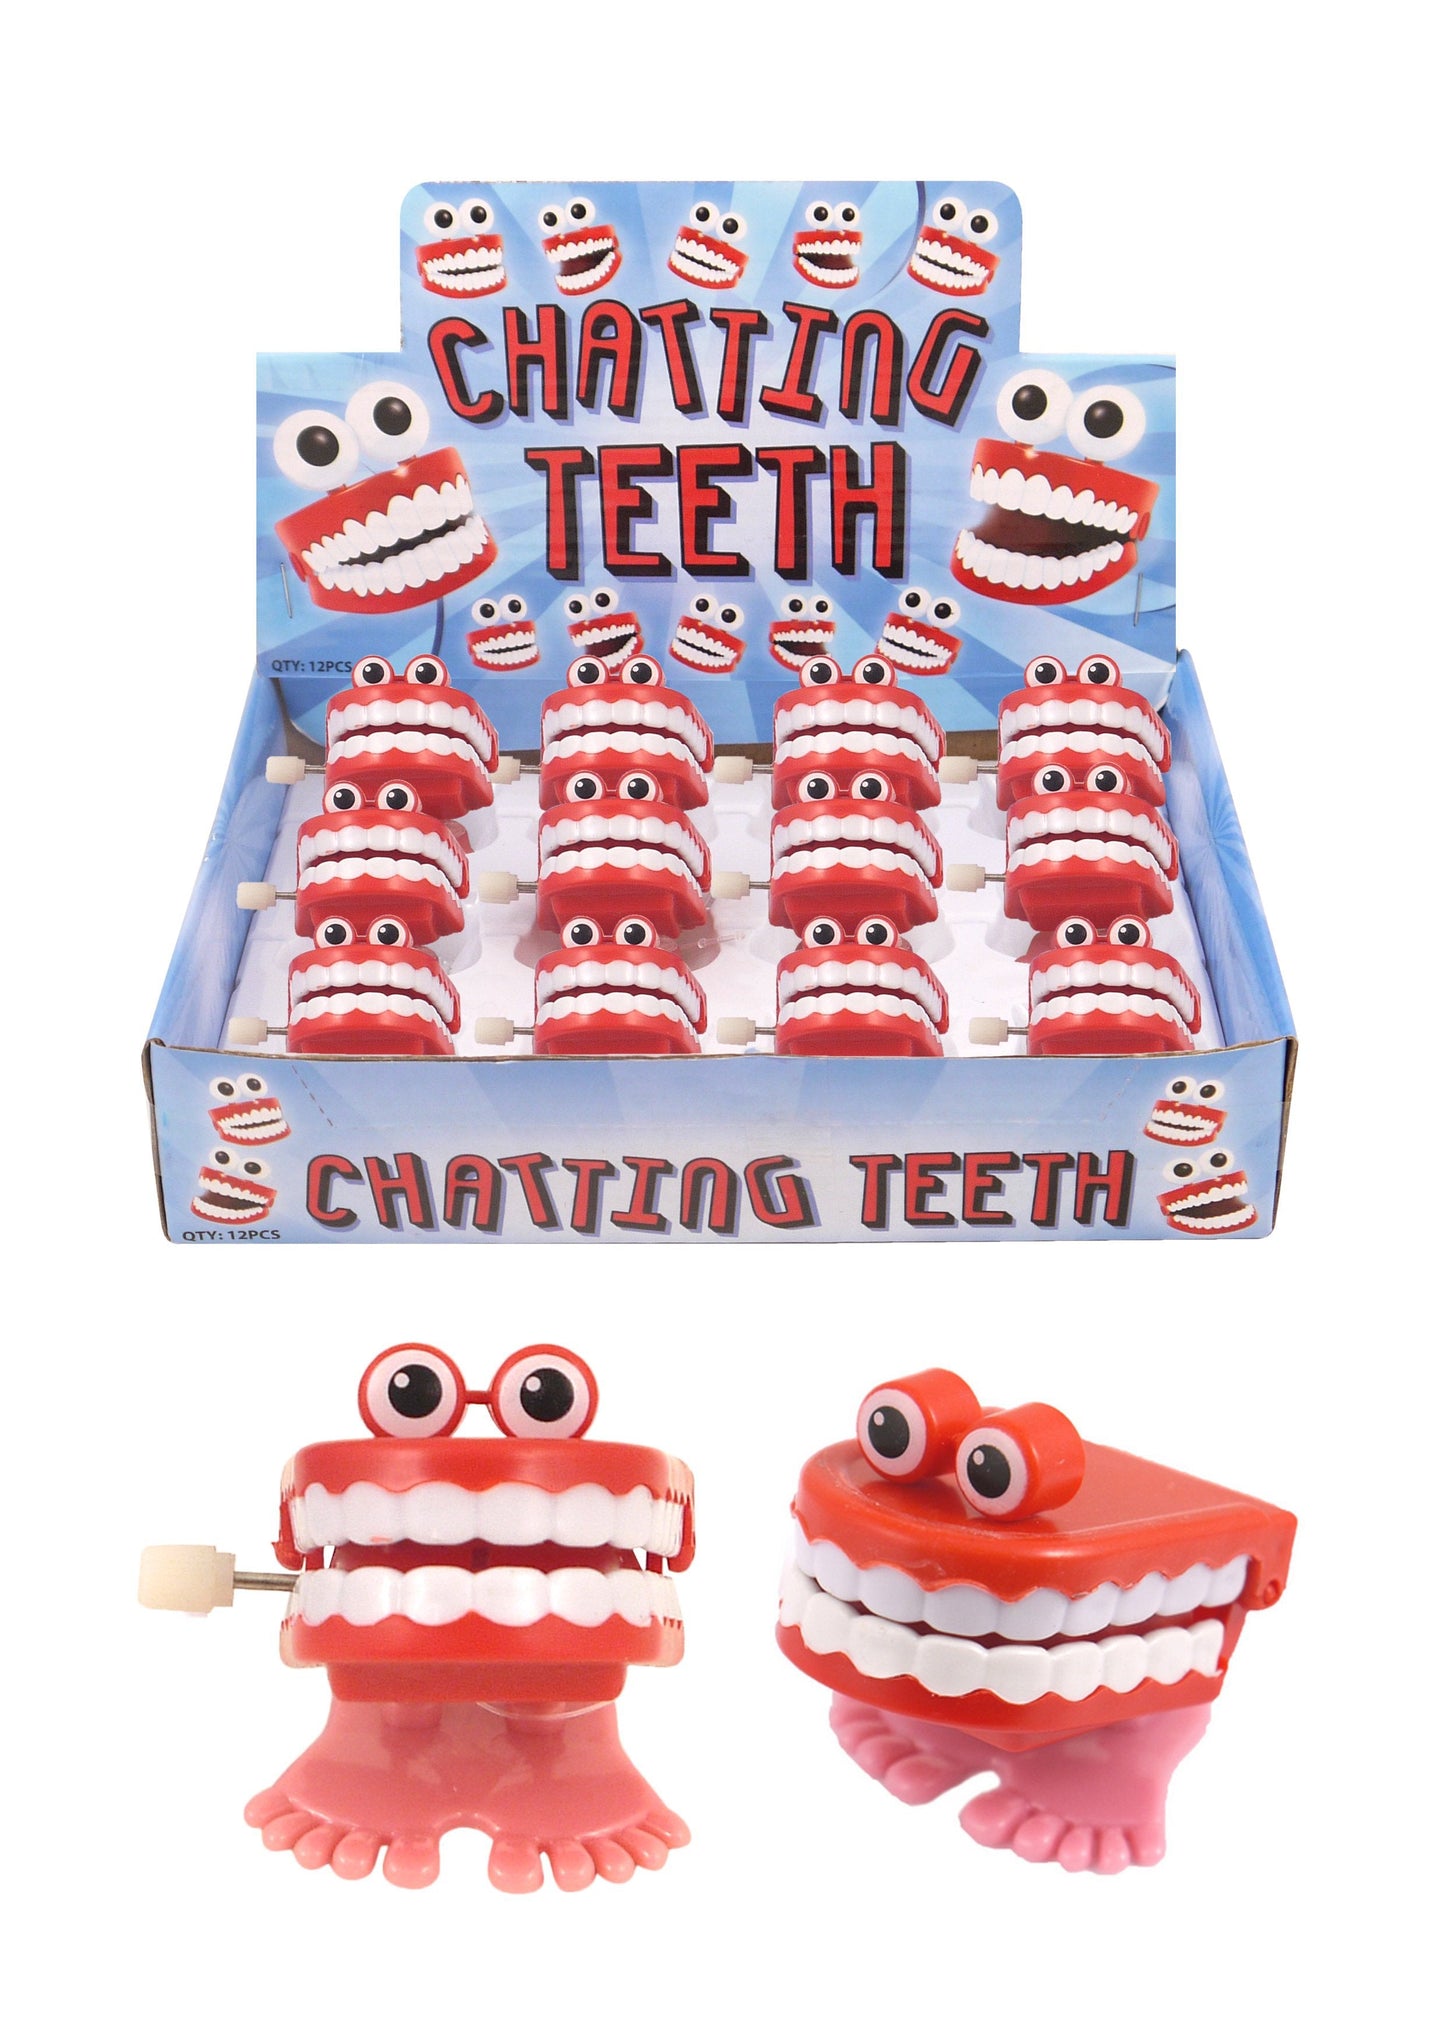 Chatting Teeth Childrens Fun Playing Toy Chattering Teeth Toy Clockwork 4cm x 1 T03548 (Parcel Rate)